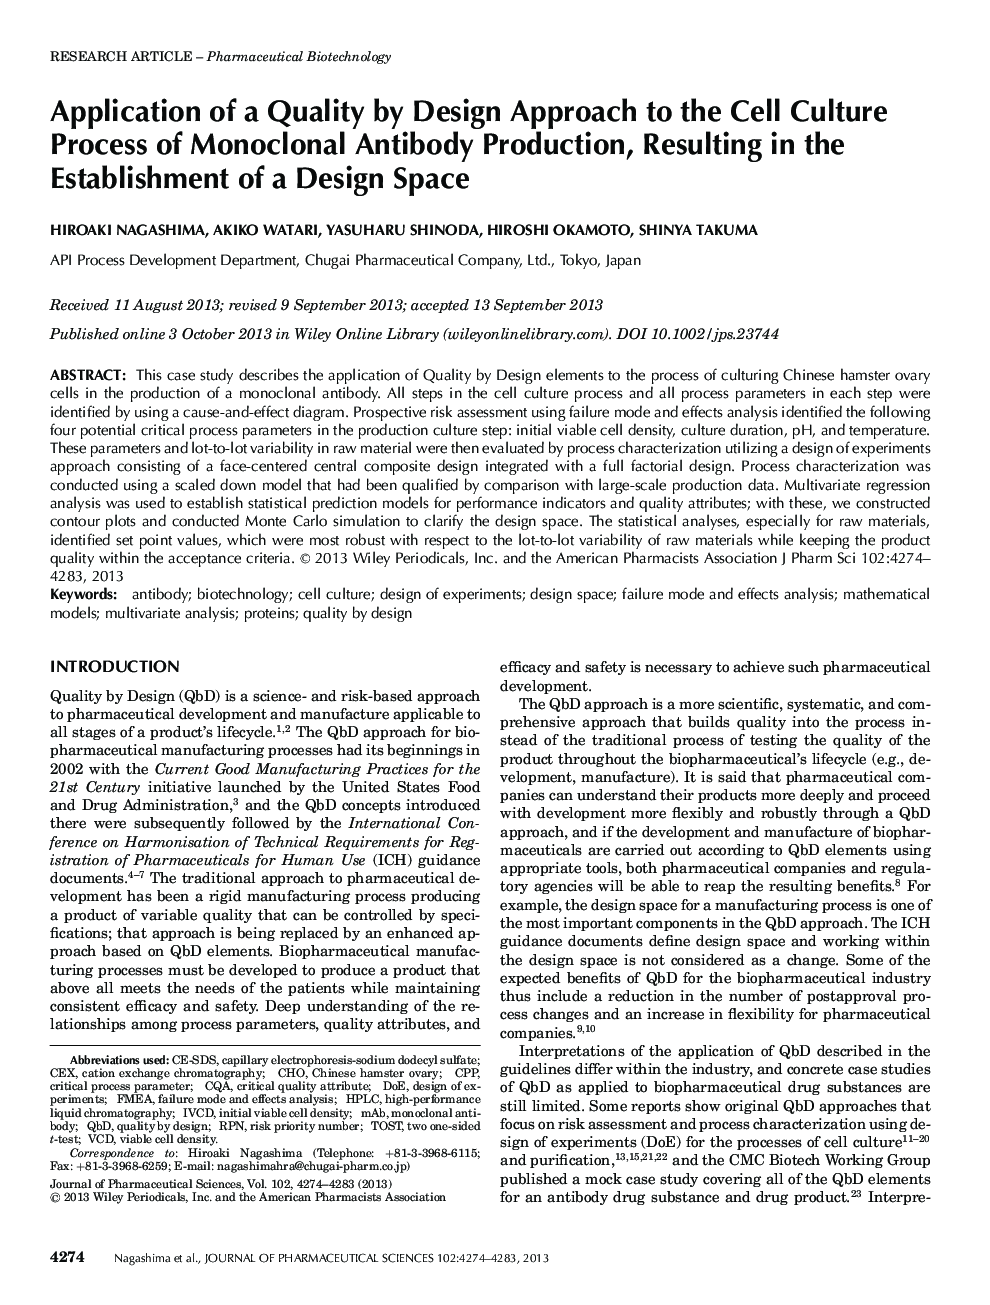 Application of a Quality by Design Approach to the Cell Culture Process of Monoclonal Antibody Production, Resulting in the Establishment of a Design Space